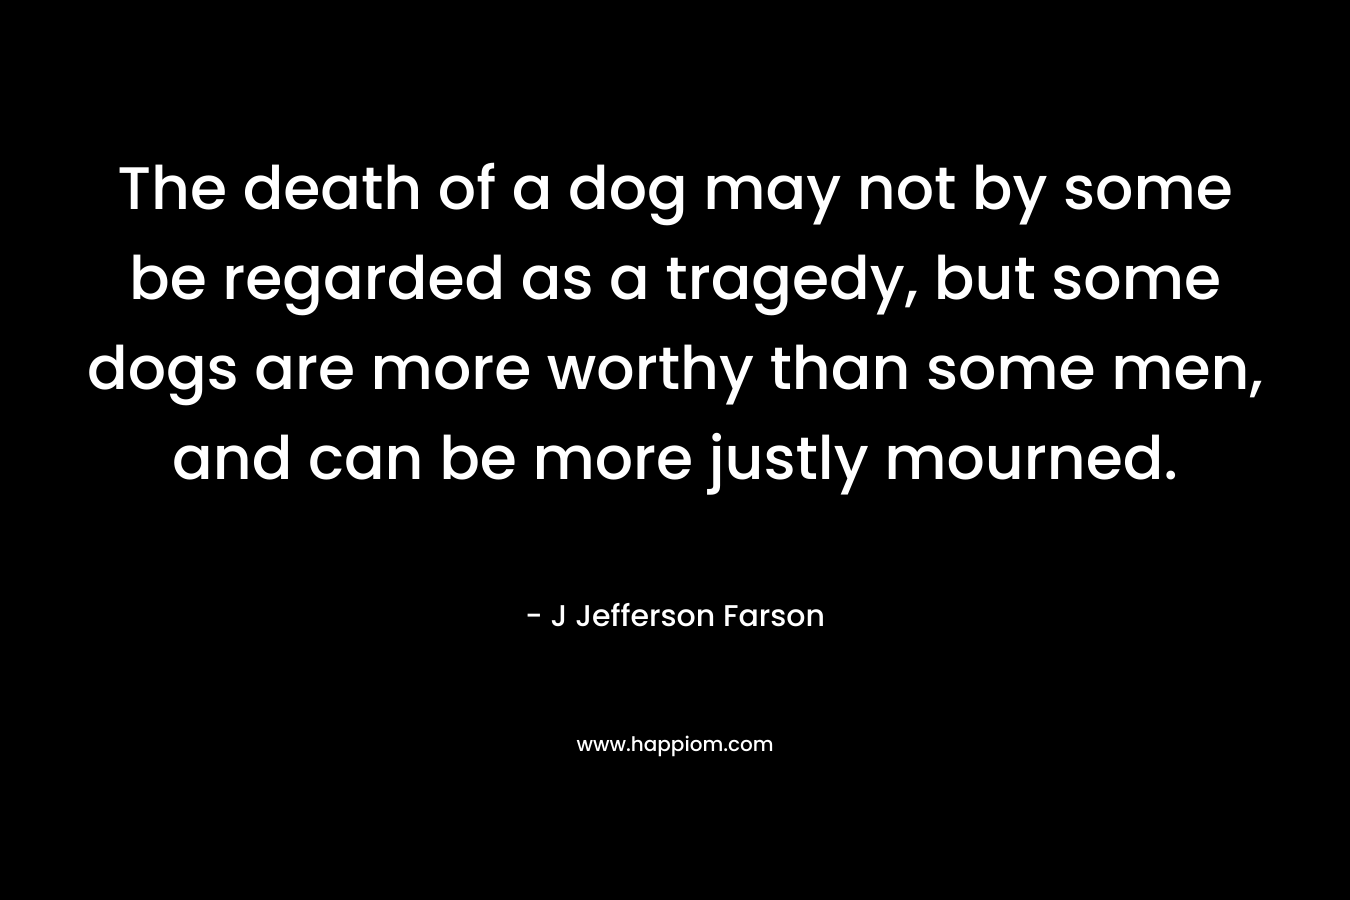 The death of a dog may not by some be regarded as a tragedy, but some dogs are more worthy than some men, and can be more justly mourned.